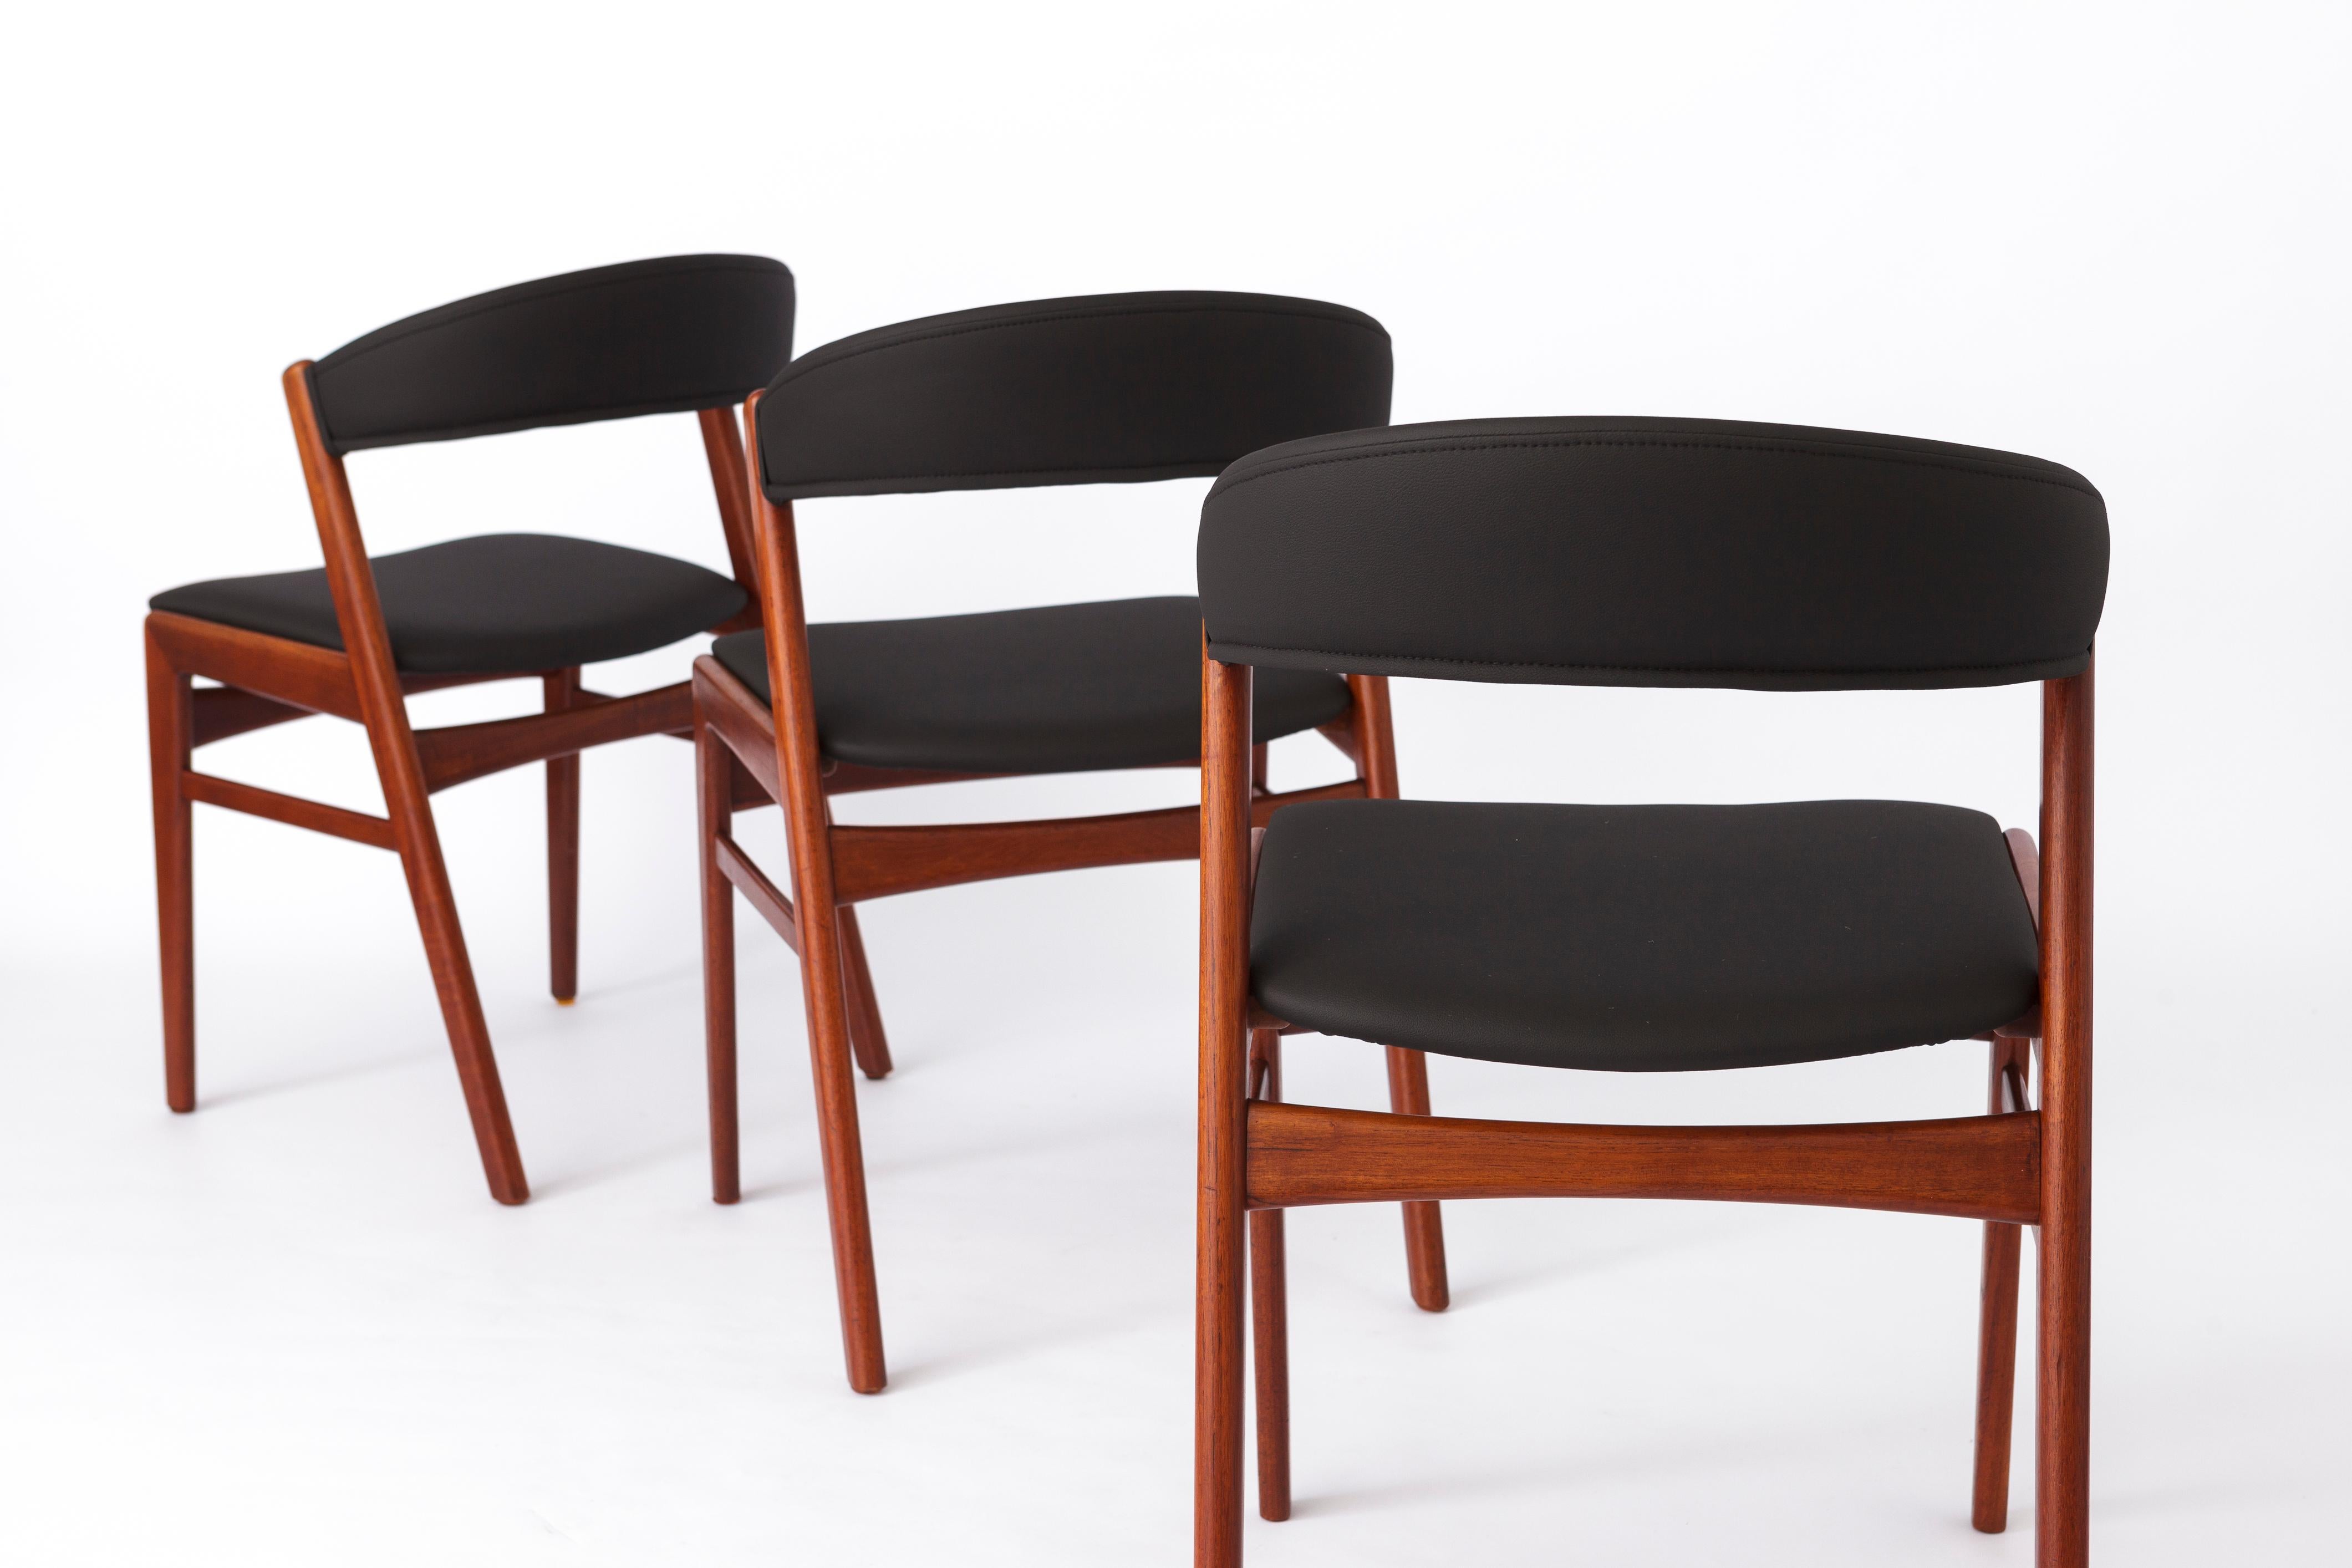 6 Vintage Chairs DUX - Ribbon Back 1960s, Sweden - Dining chairs, Teak, Set of 6 For Sale 2